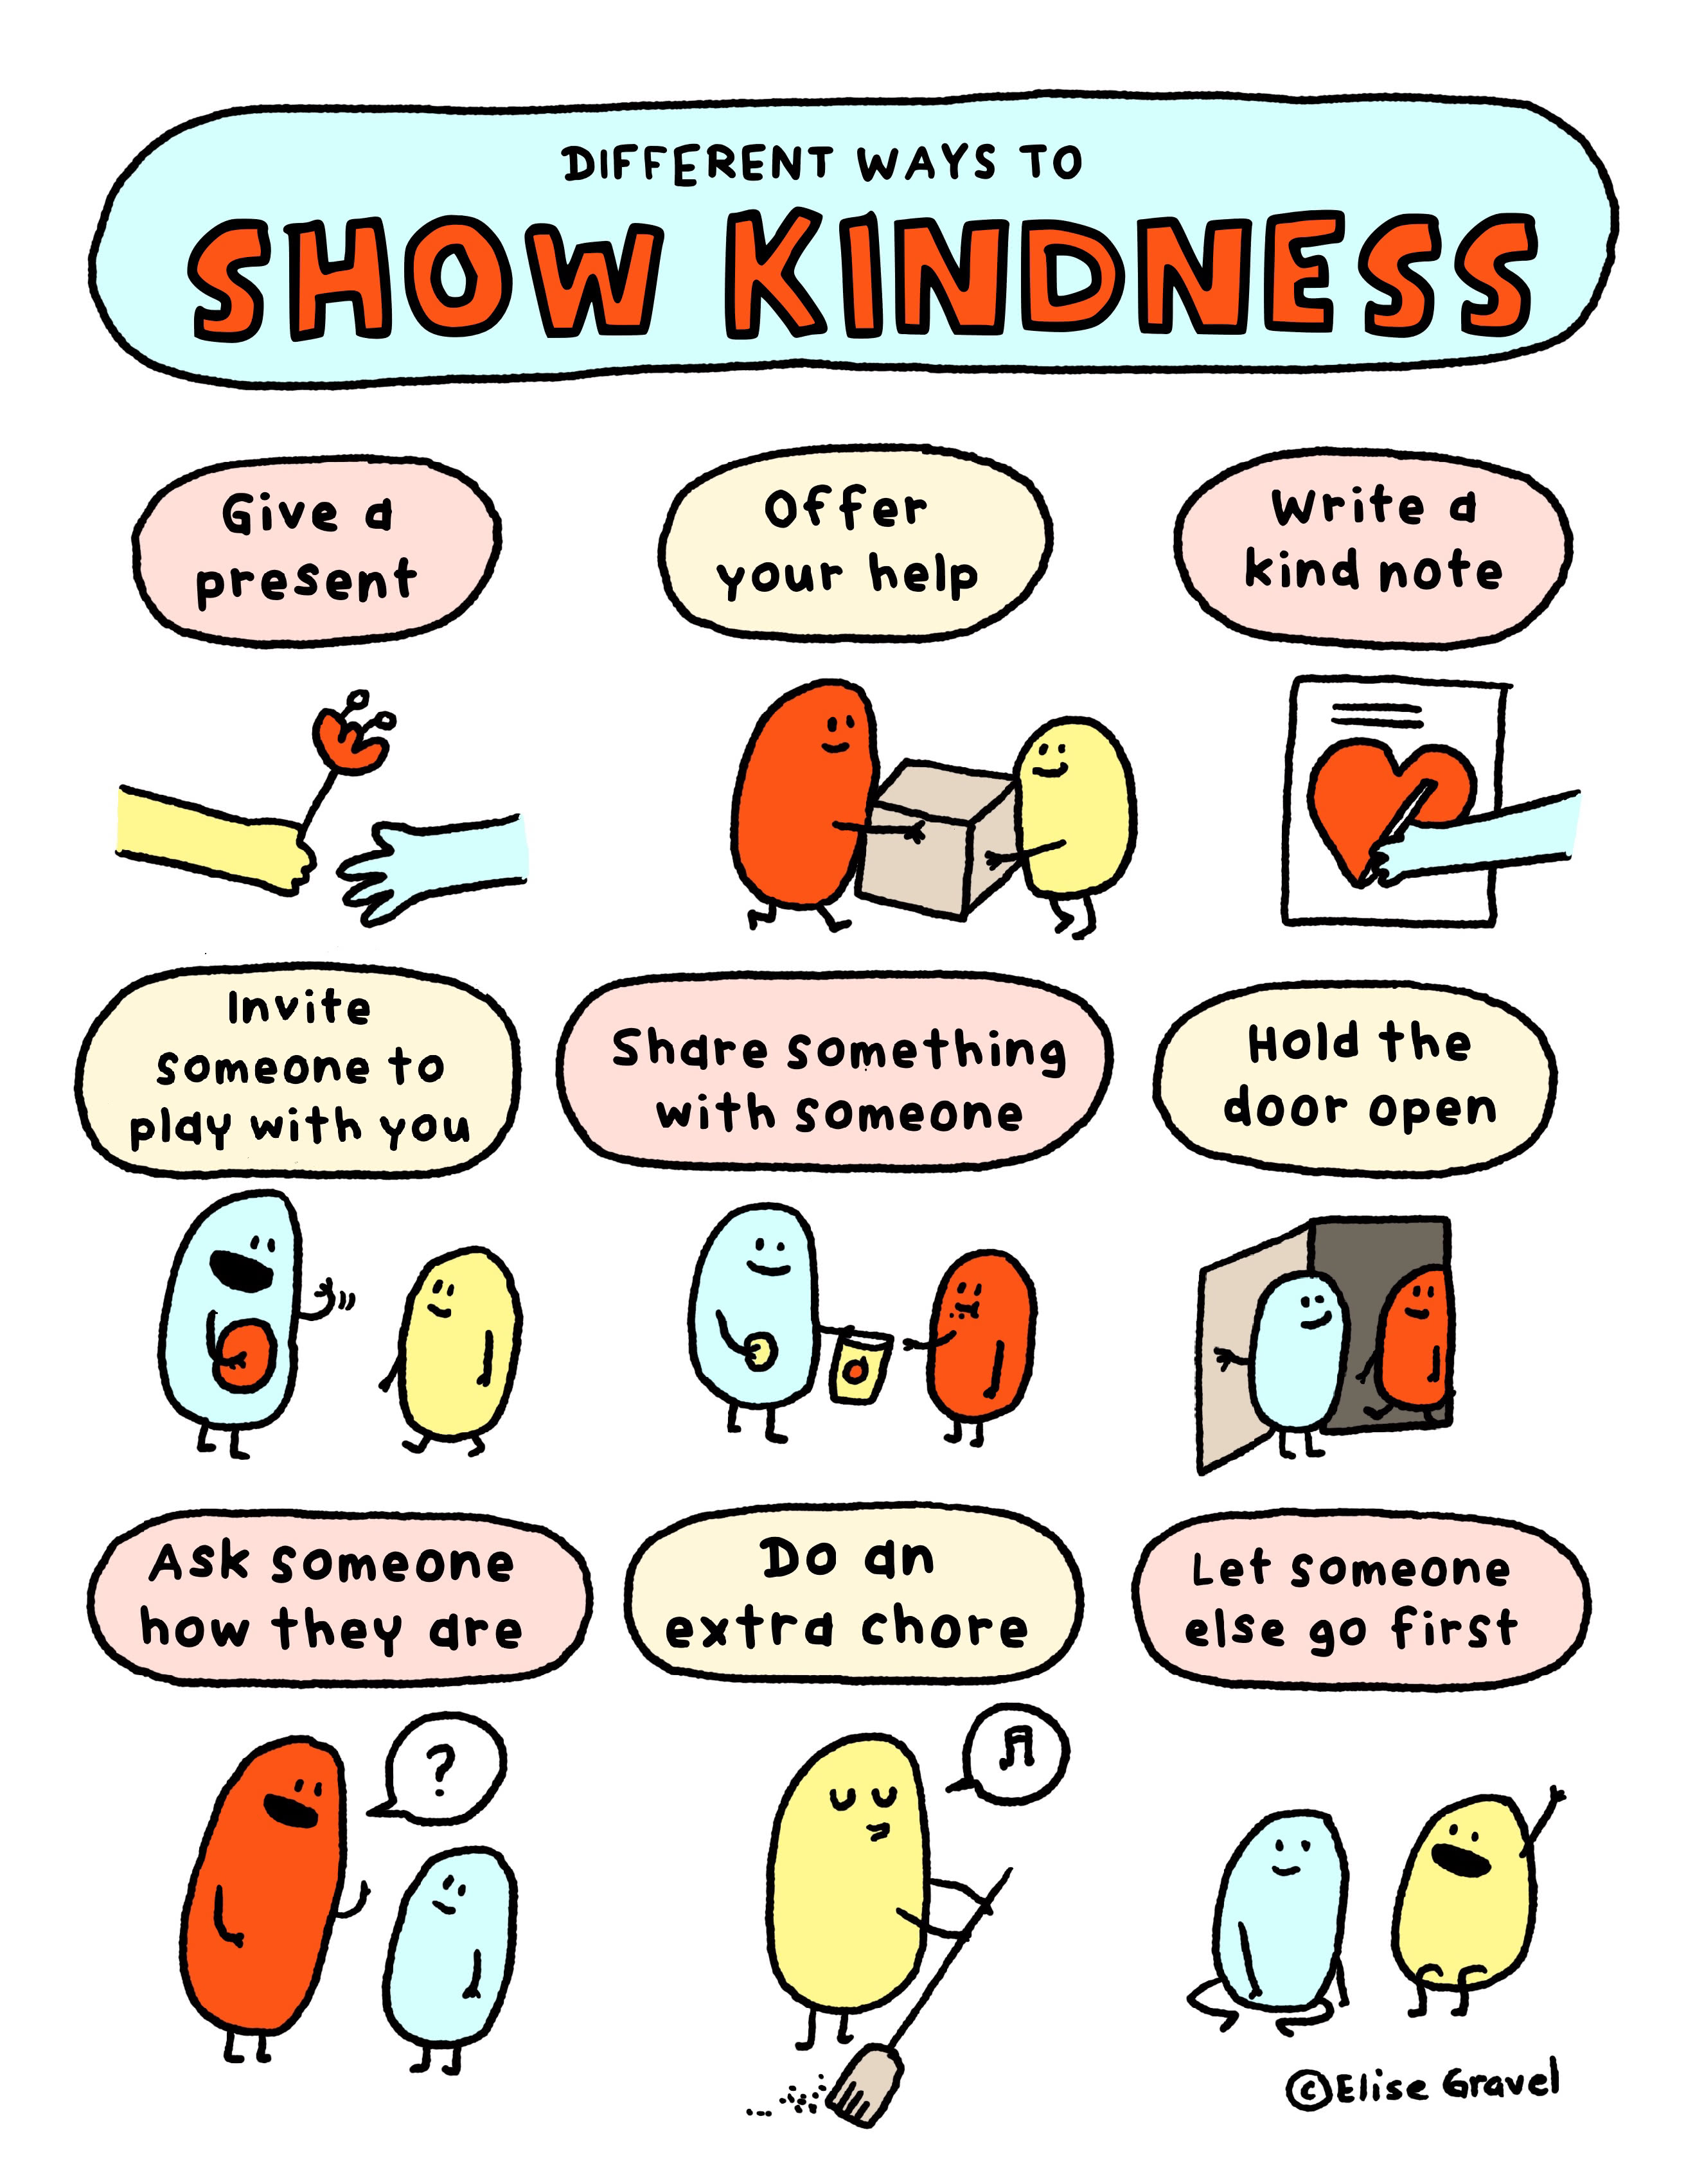 Different ways to show kindness